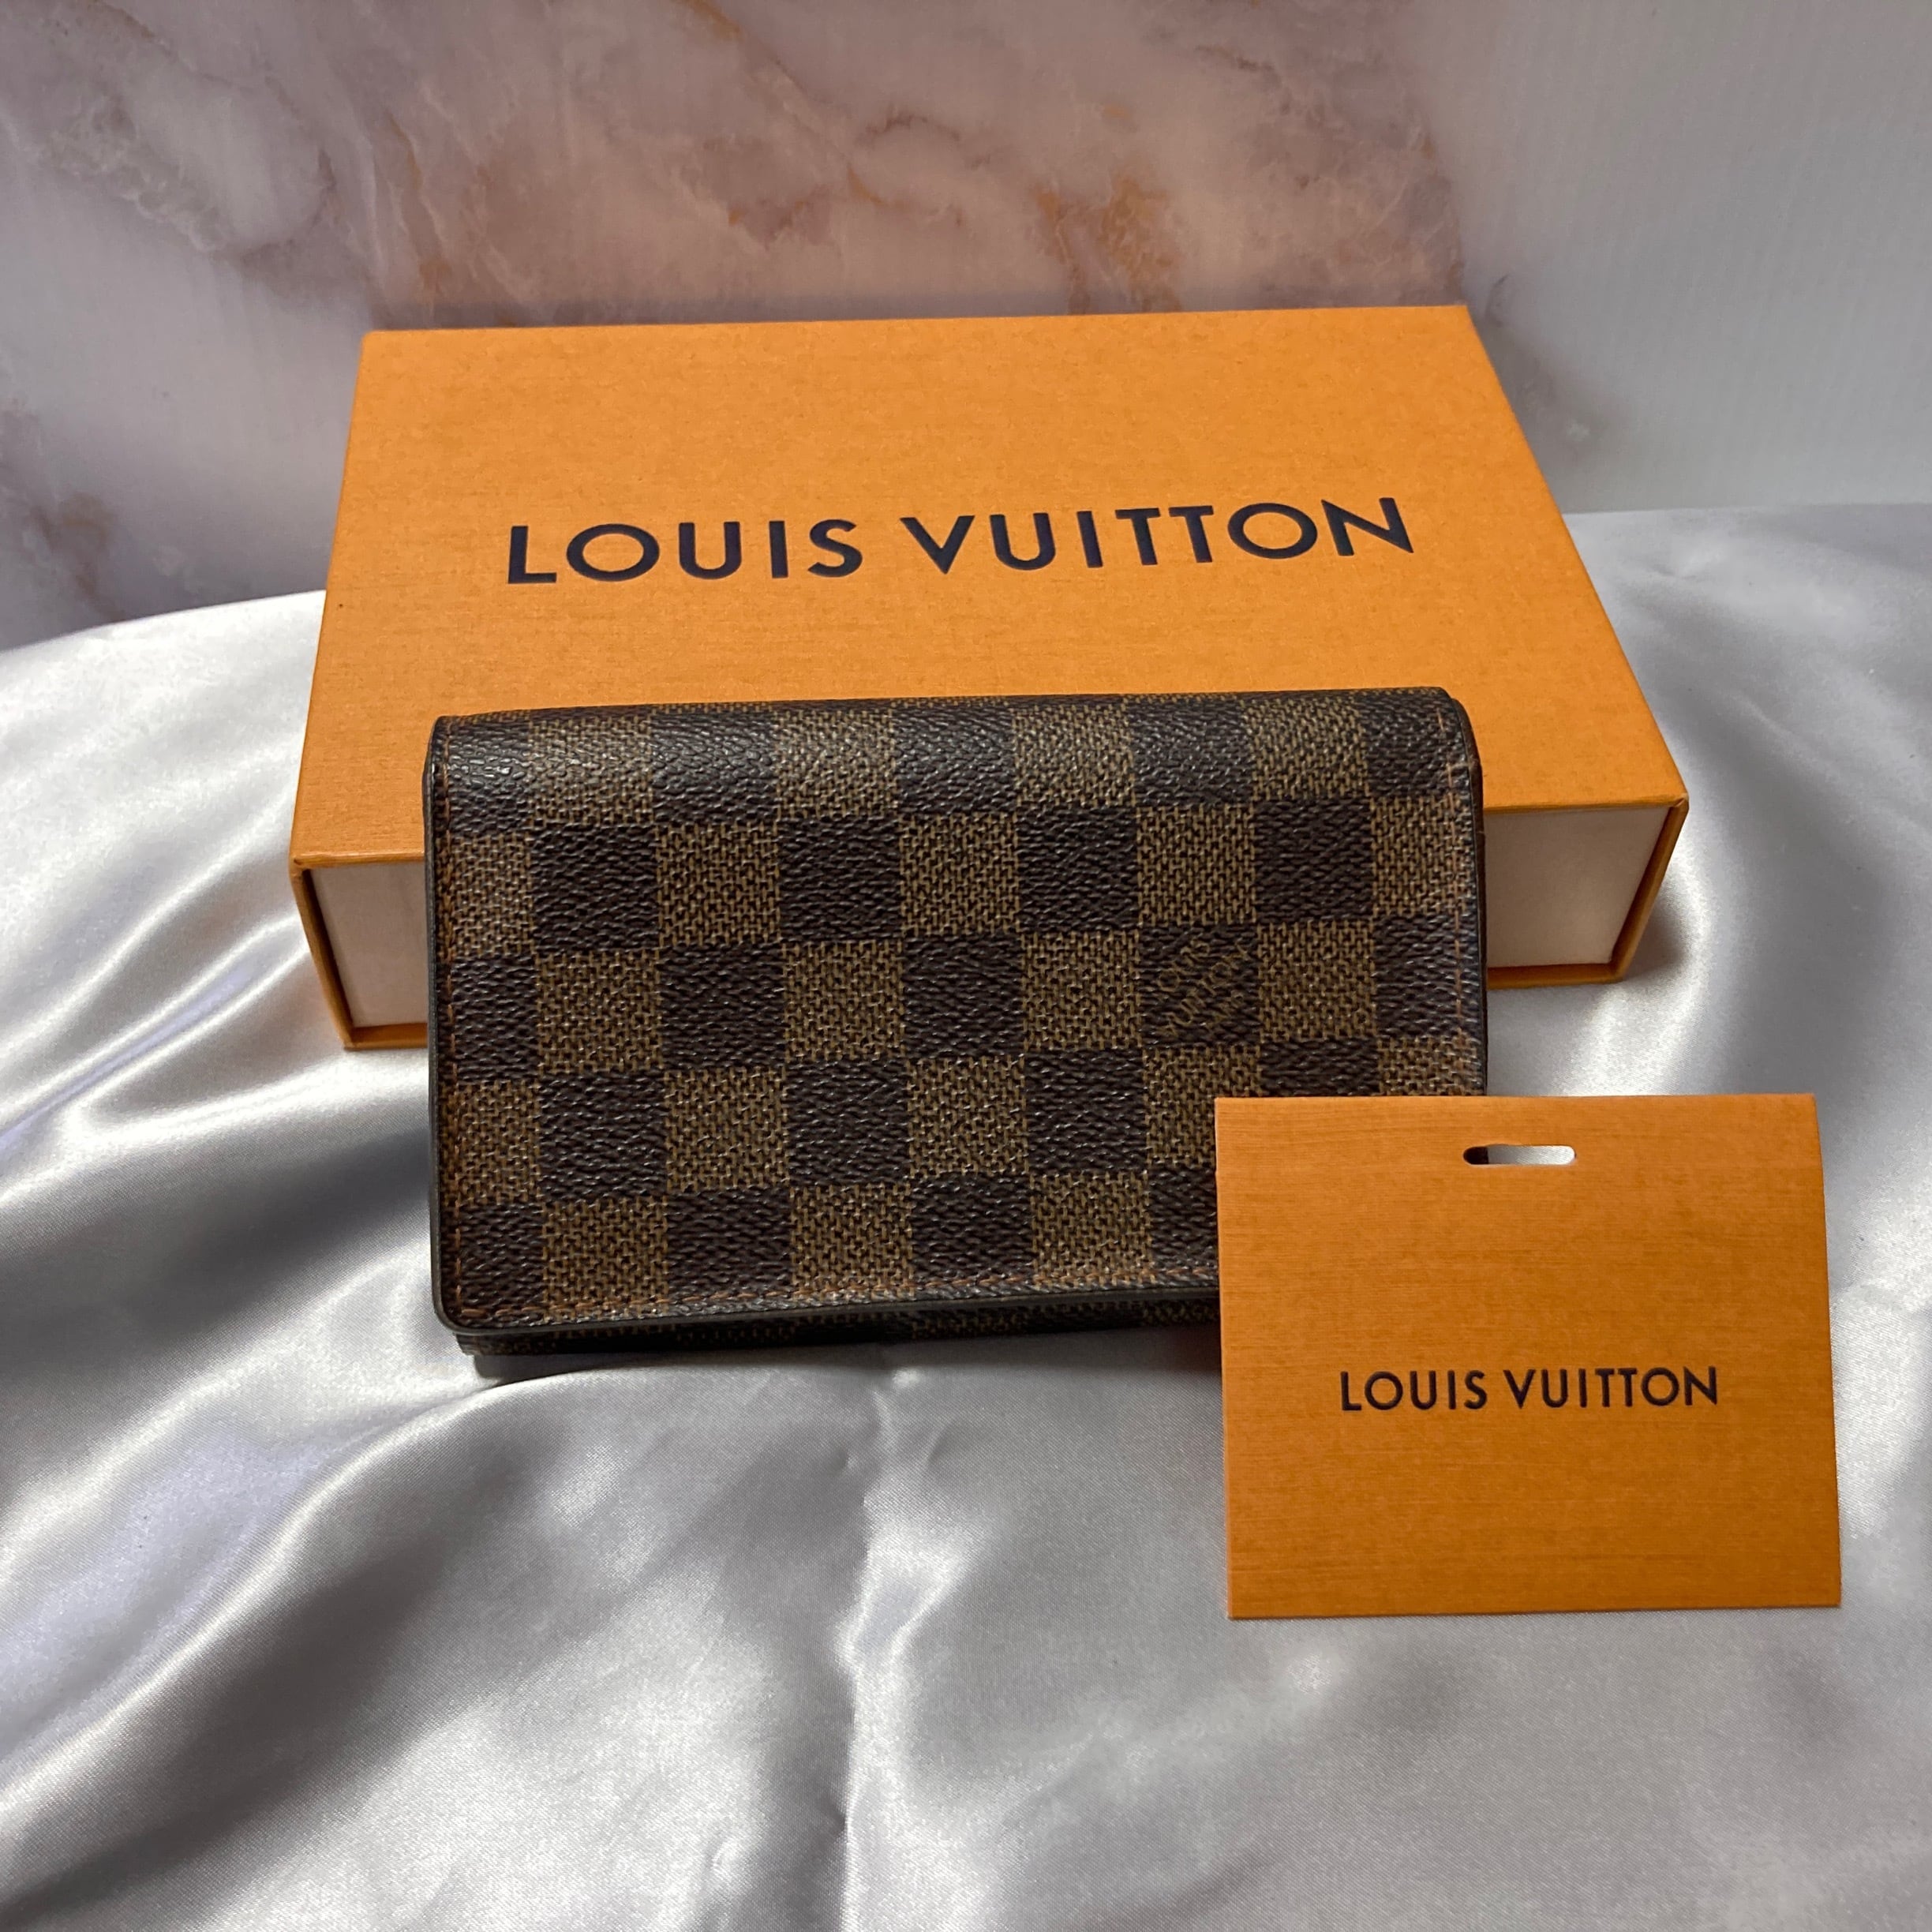 LOUIS VUITTON】ルイヴィトン ダミエ ポルトフォイユトレゾール 財布 ...